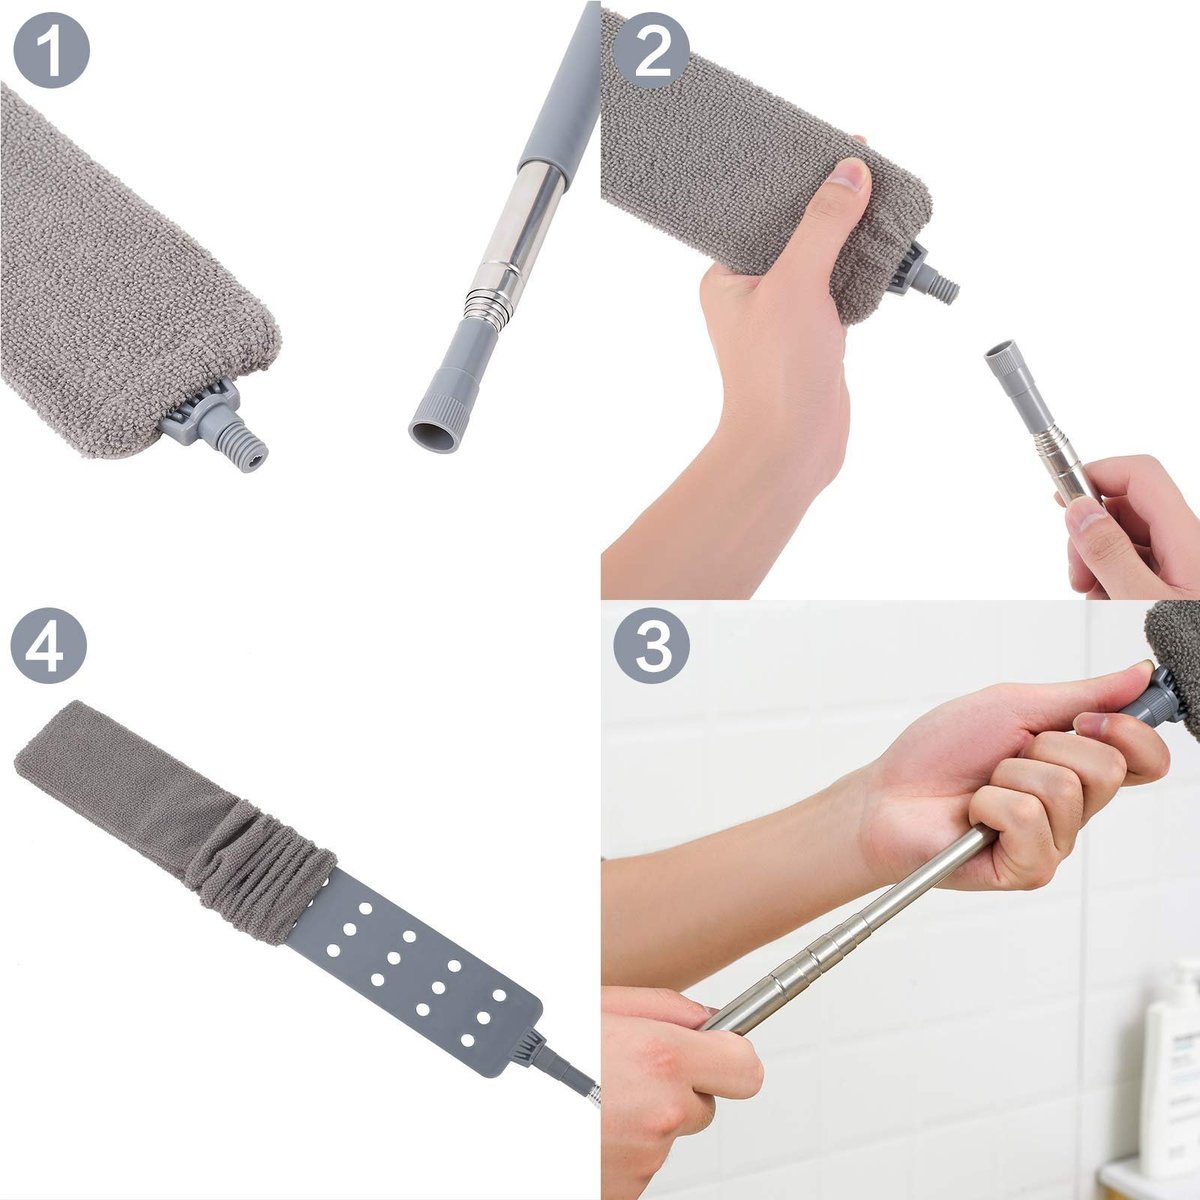 (🔥Hot Sale-Save 48% OFF) Retractable Gap Dust Cleaner